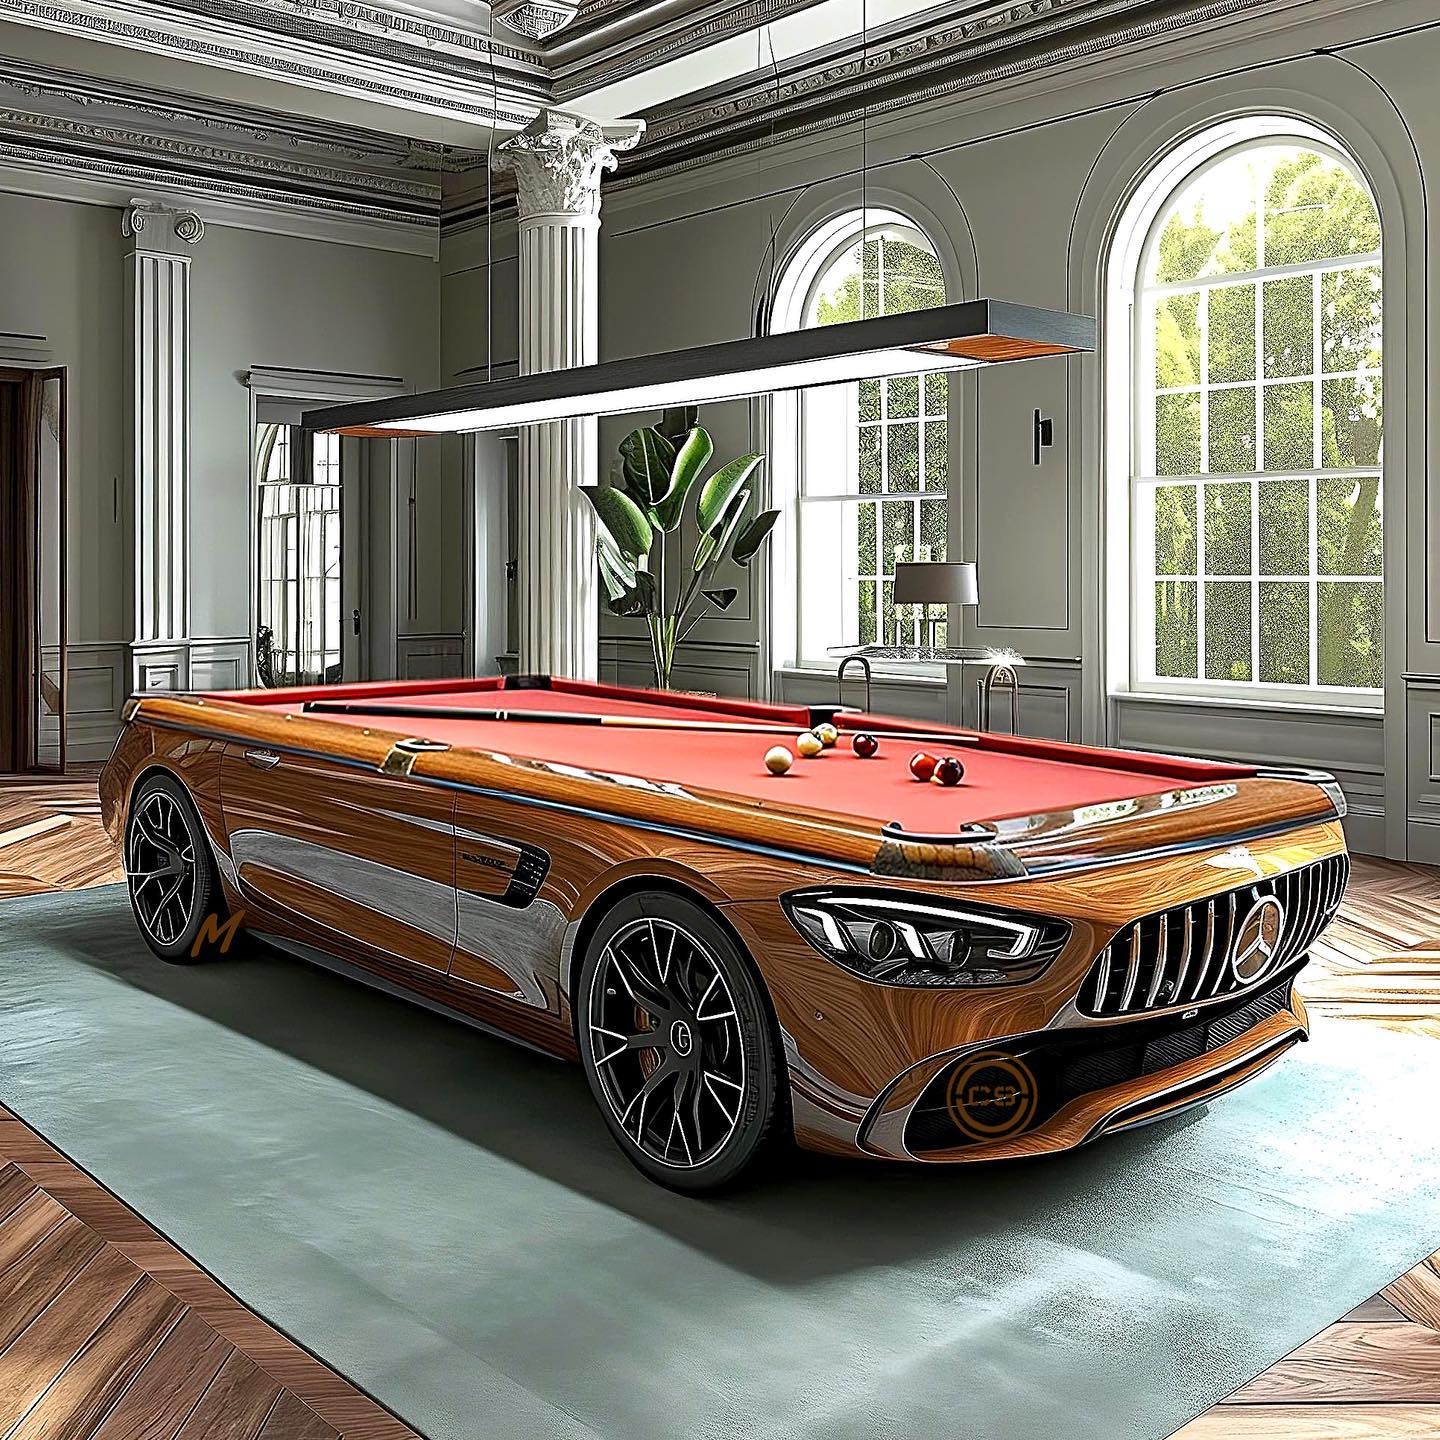 Advantages of Having a Mercedes-Inspired Pool Table